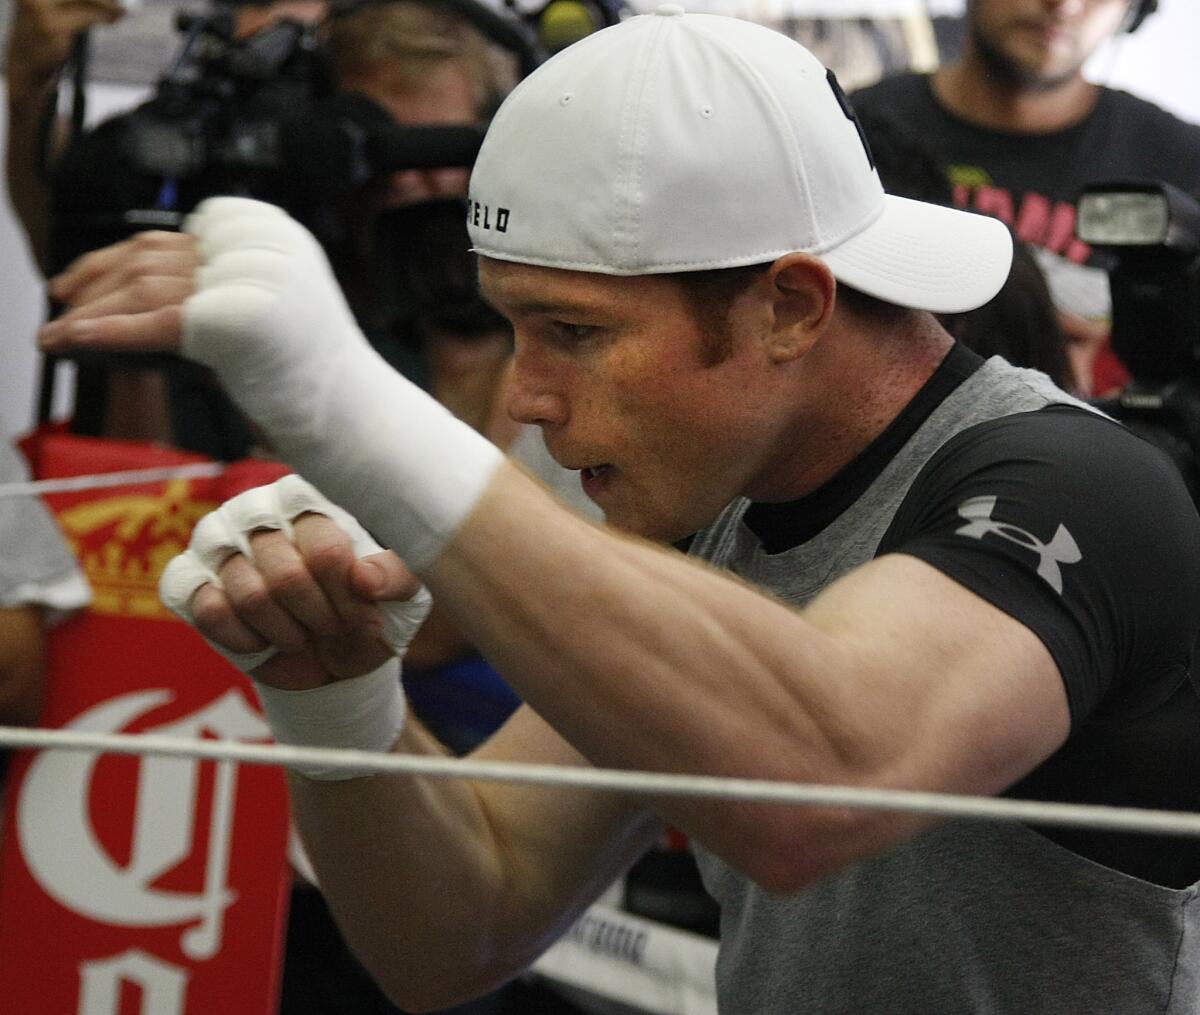 Saul "Canelo" Alvarez is shown working out at a media event in 2013.